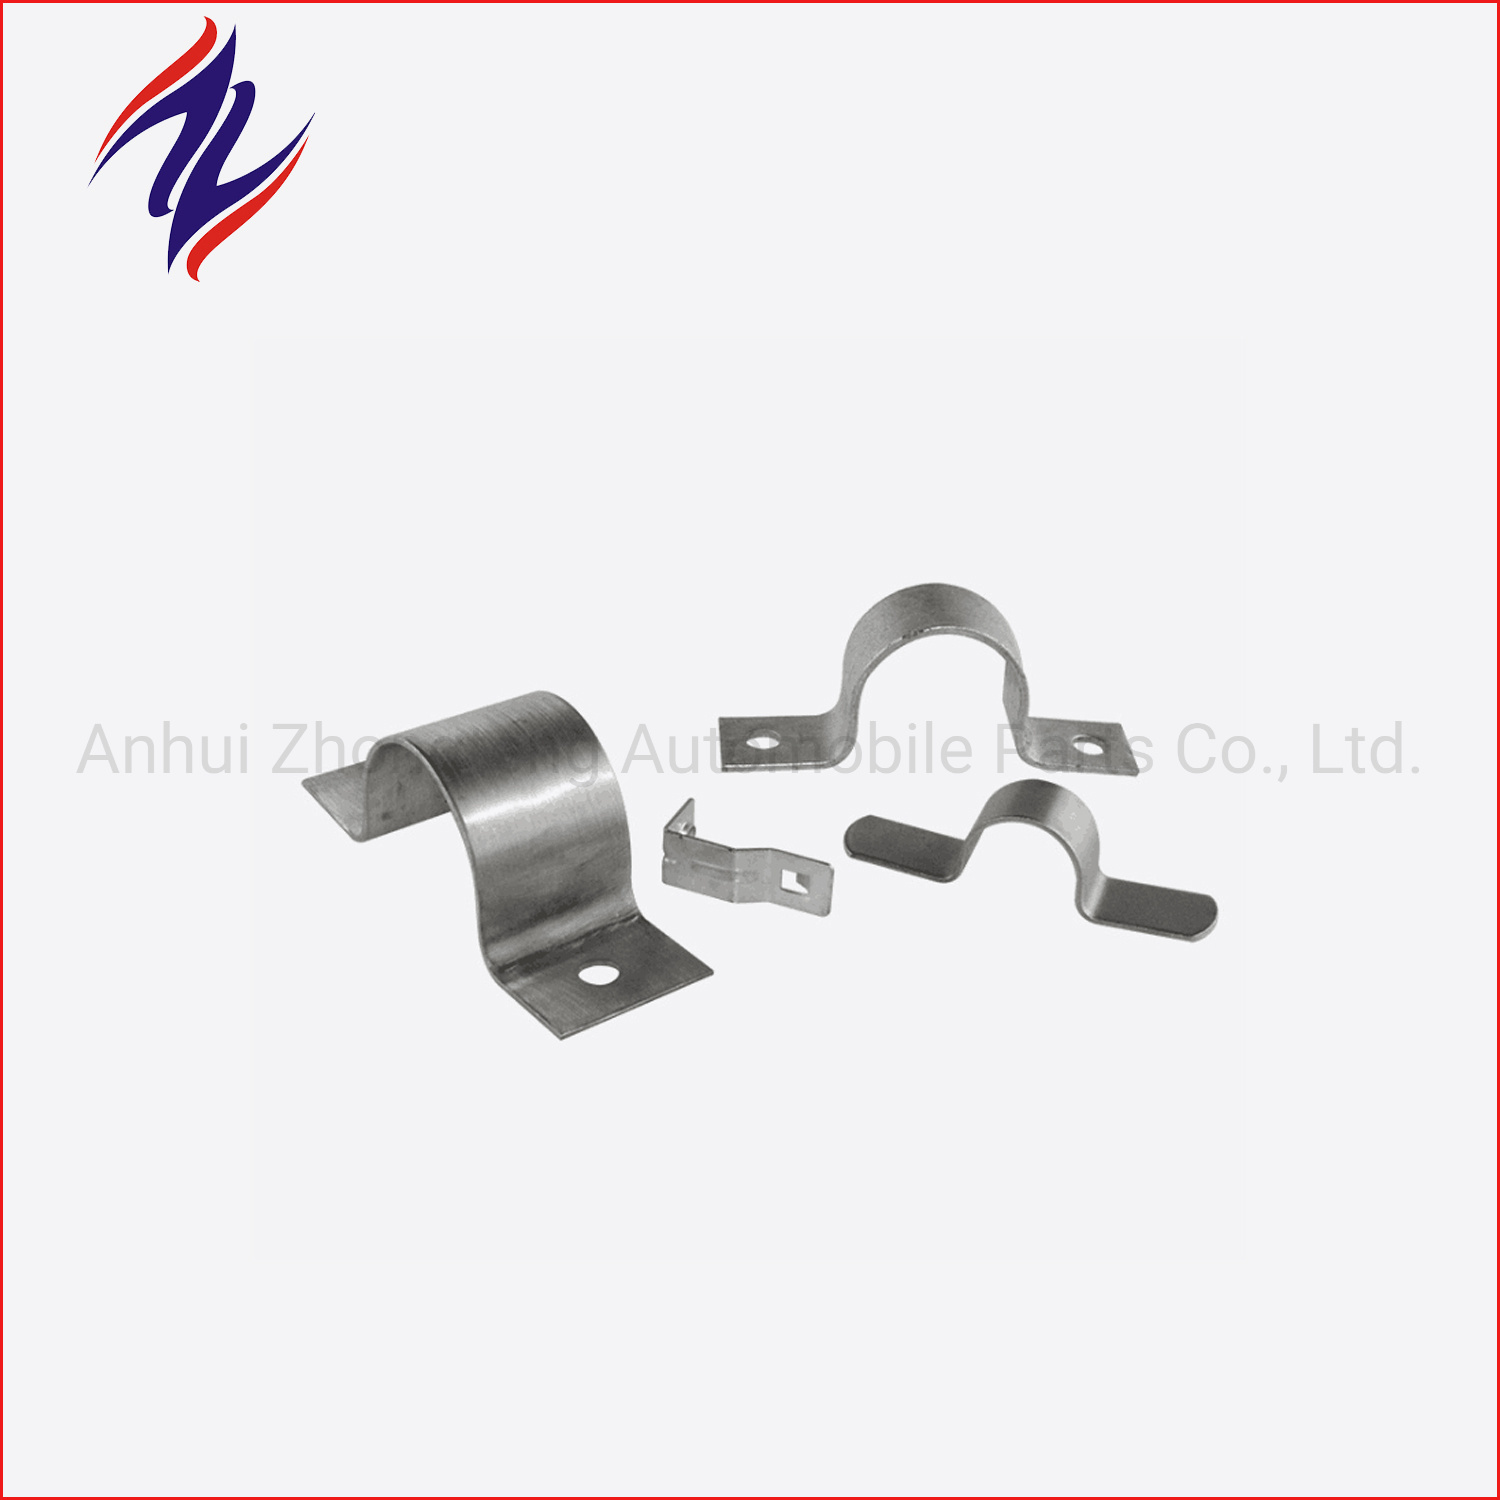 U-Bolt Strut Pipe Fitting Saddle Thicken Metal Pipe Clamp